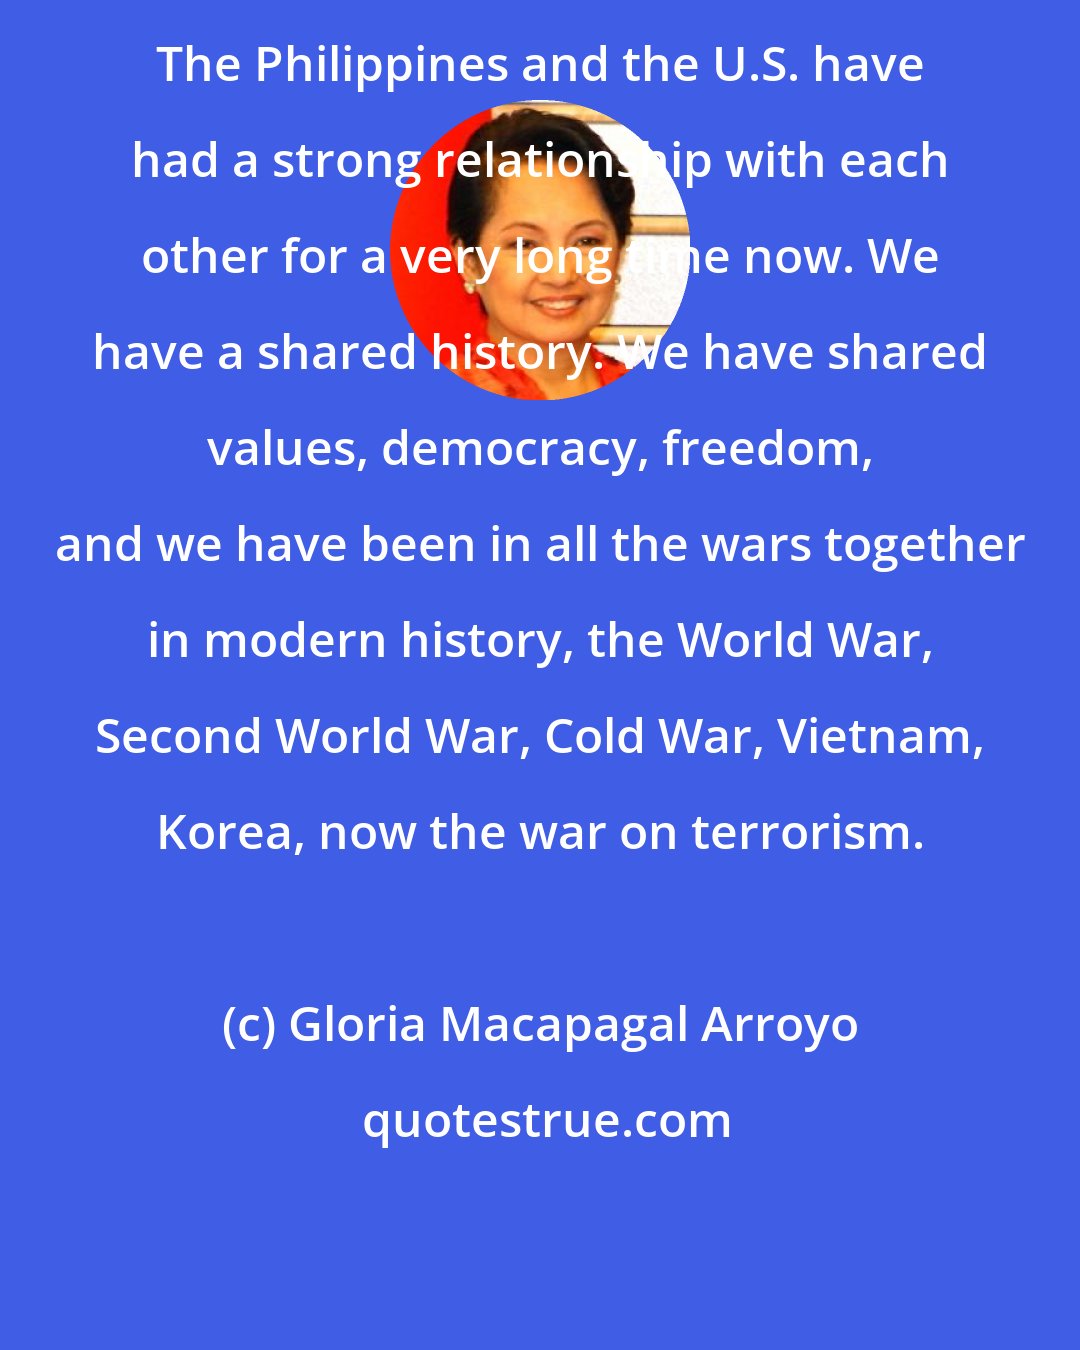 Gloria Macapagal Arroyo: The Philippines and the U.S. have had a strong relationship with each other for a very long time now. We have a shared history. We have shared values, democracy, freedom, and we have been in all the wars together in modern history, the World War, Second World War, Cold War, Vietnam, Korea, now the war on terrorism.